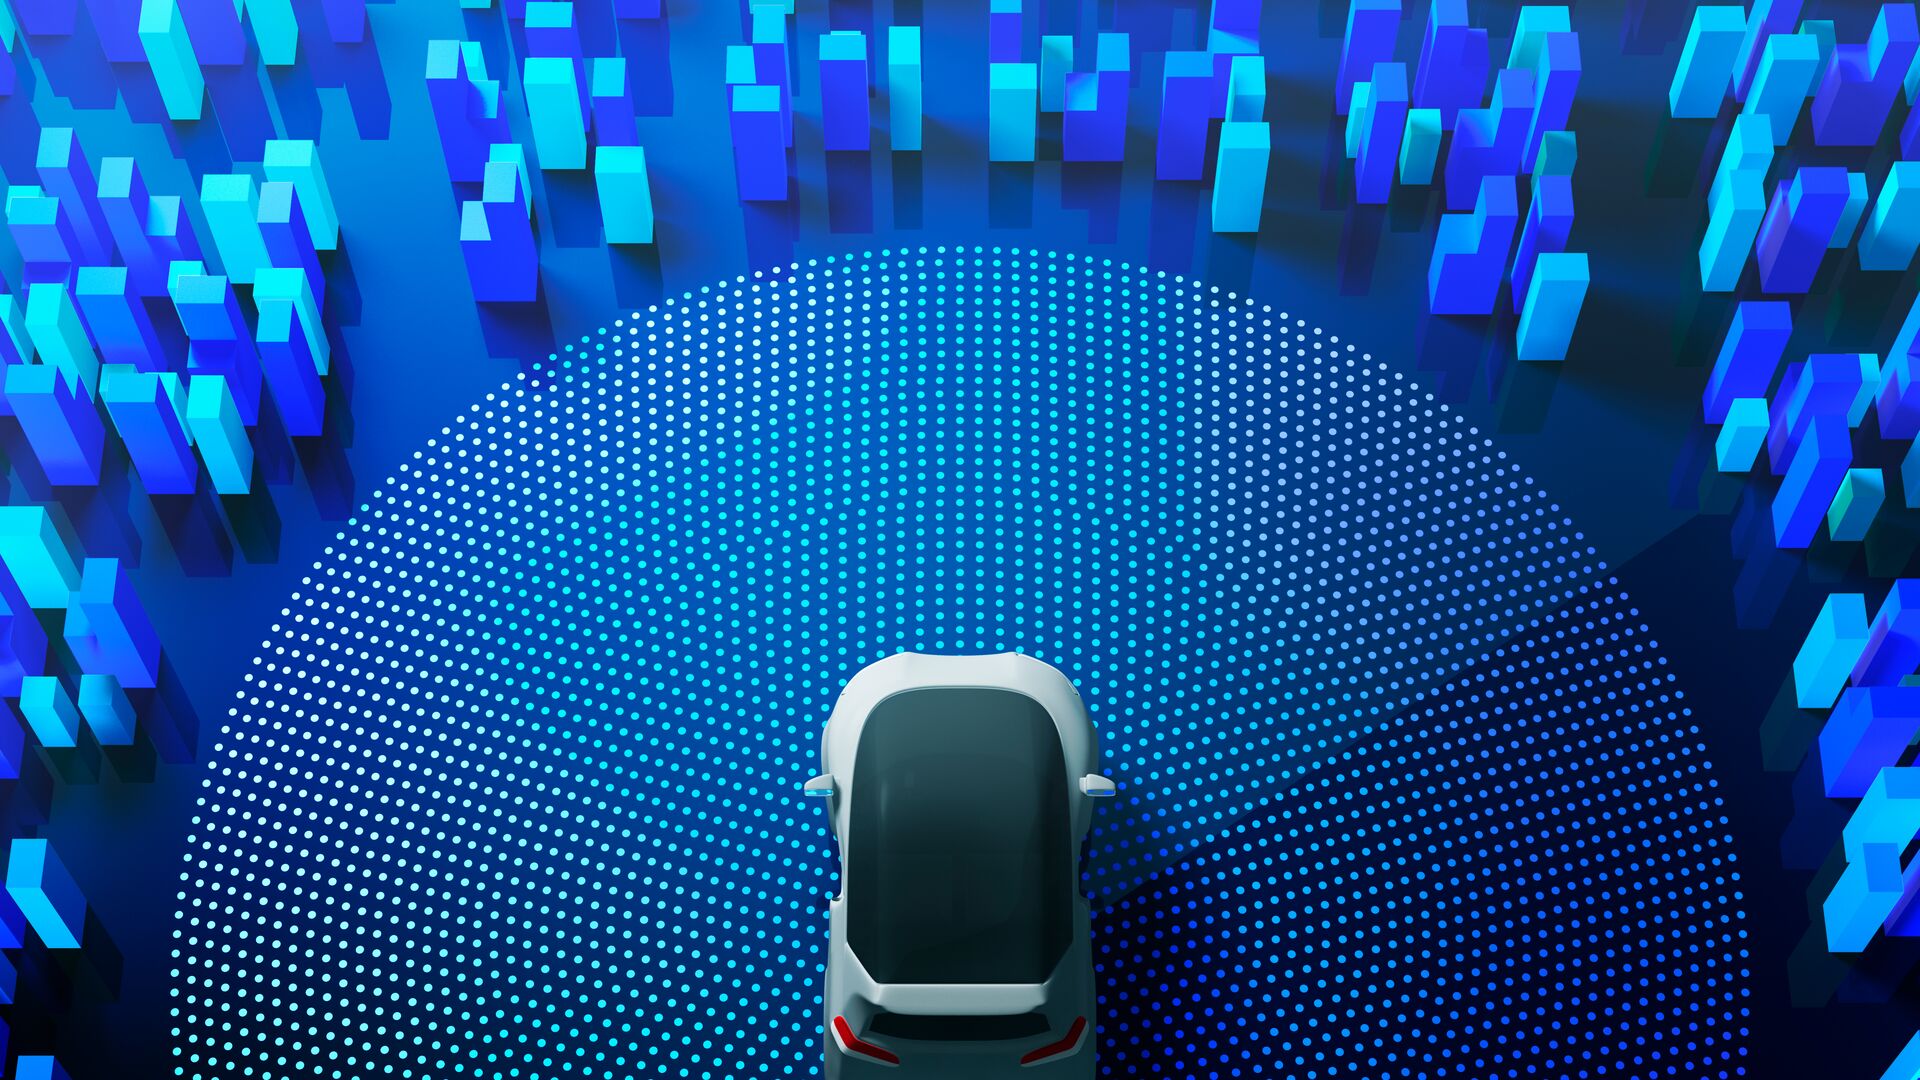 Small driverless white car ready to traverse a digitally formulated landscape mapping to our own cities and destinations. The background is blue and destinations are distinguished as blue and light blue blocks.